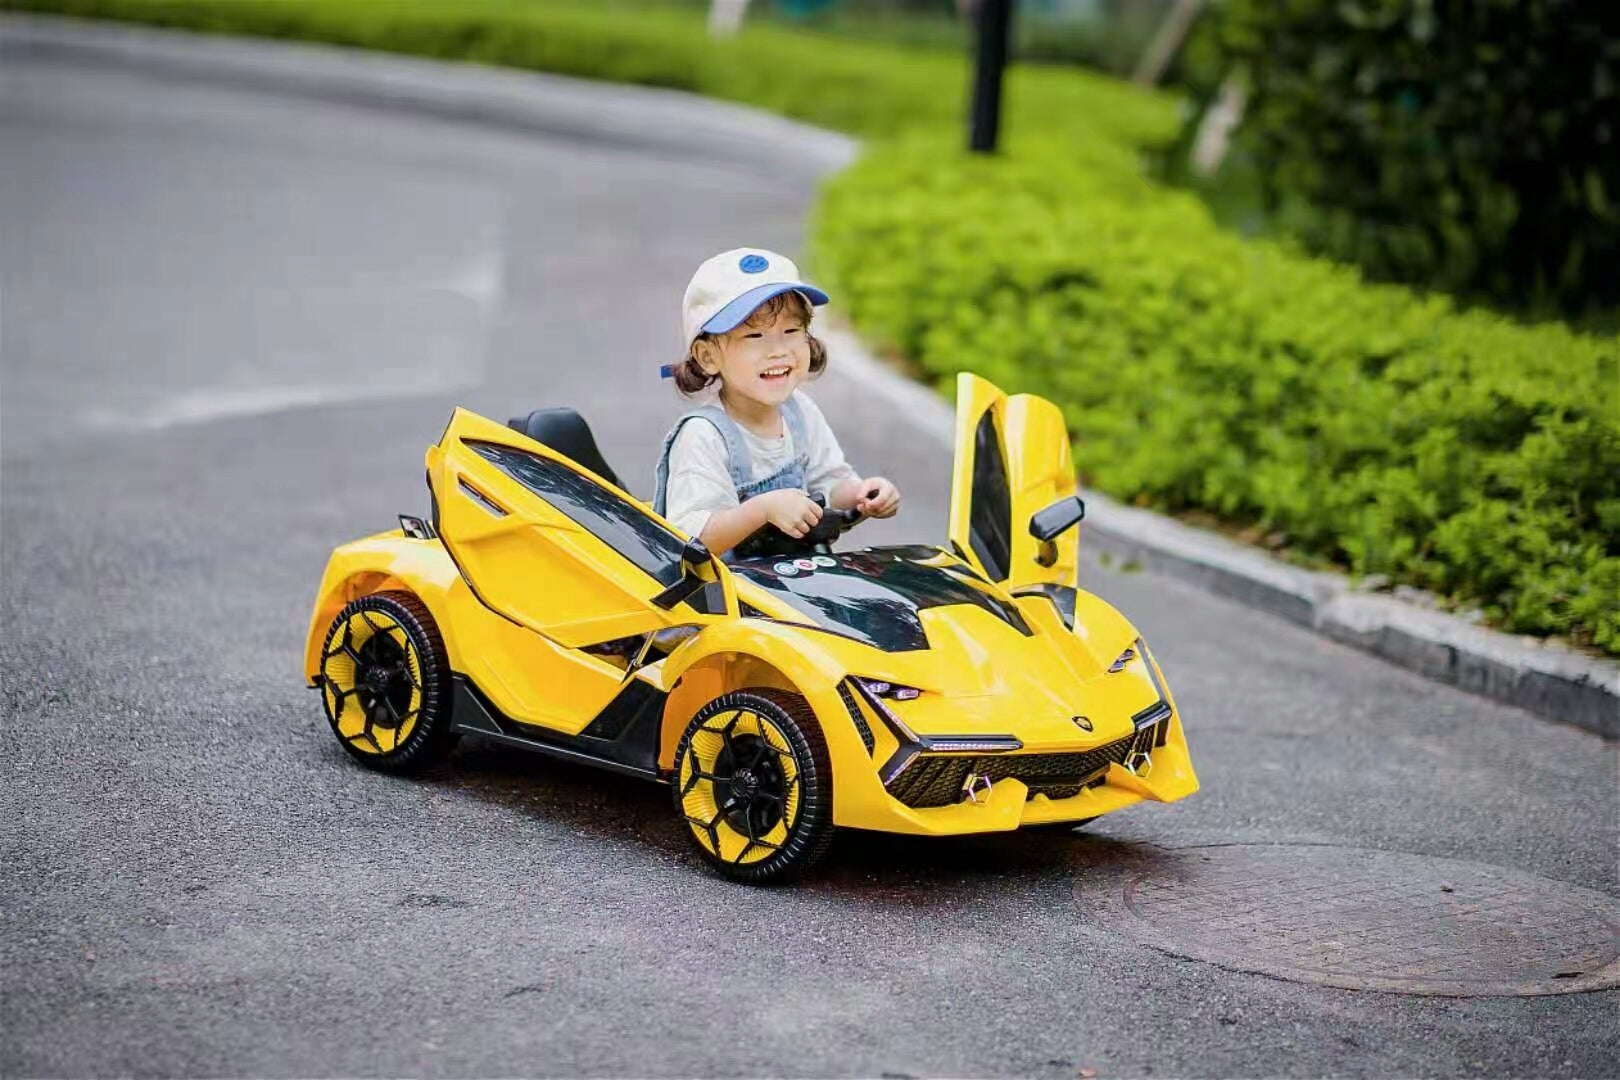 ride on car, kids electric car, Tamco riding toys for yellow-50 - 99 lbs-3 to 4 years-plastic-indoor &